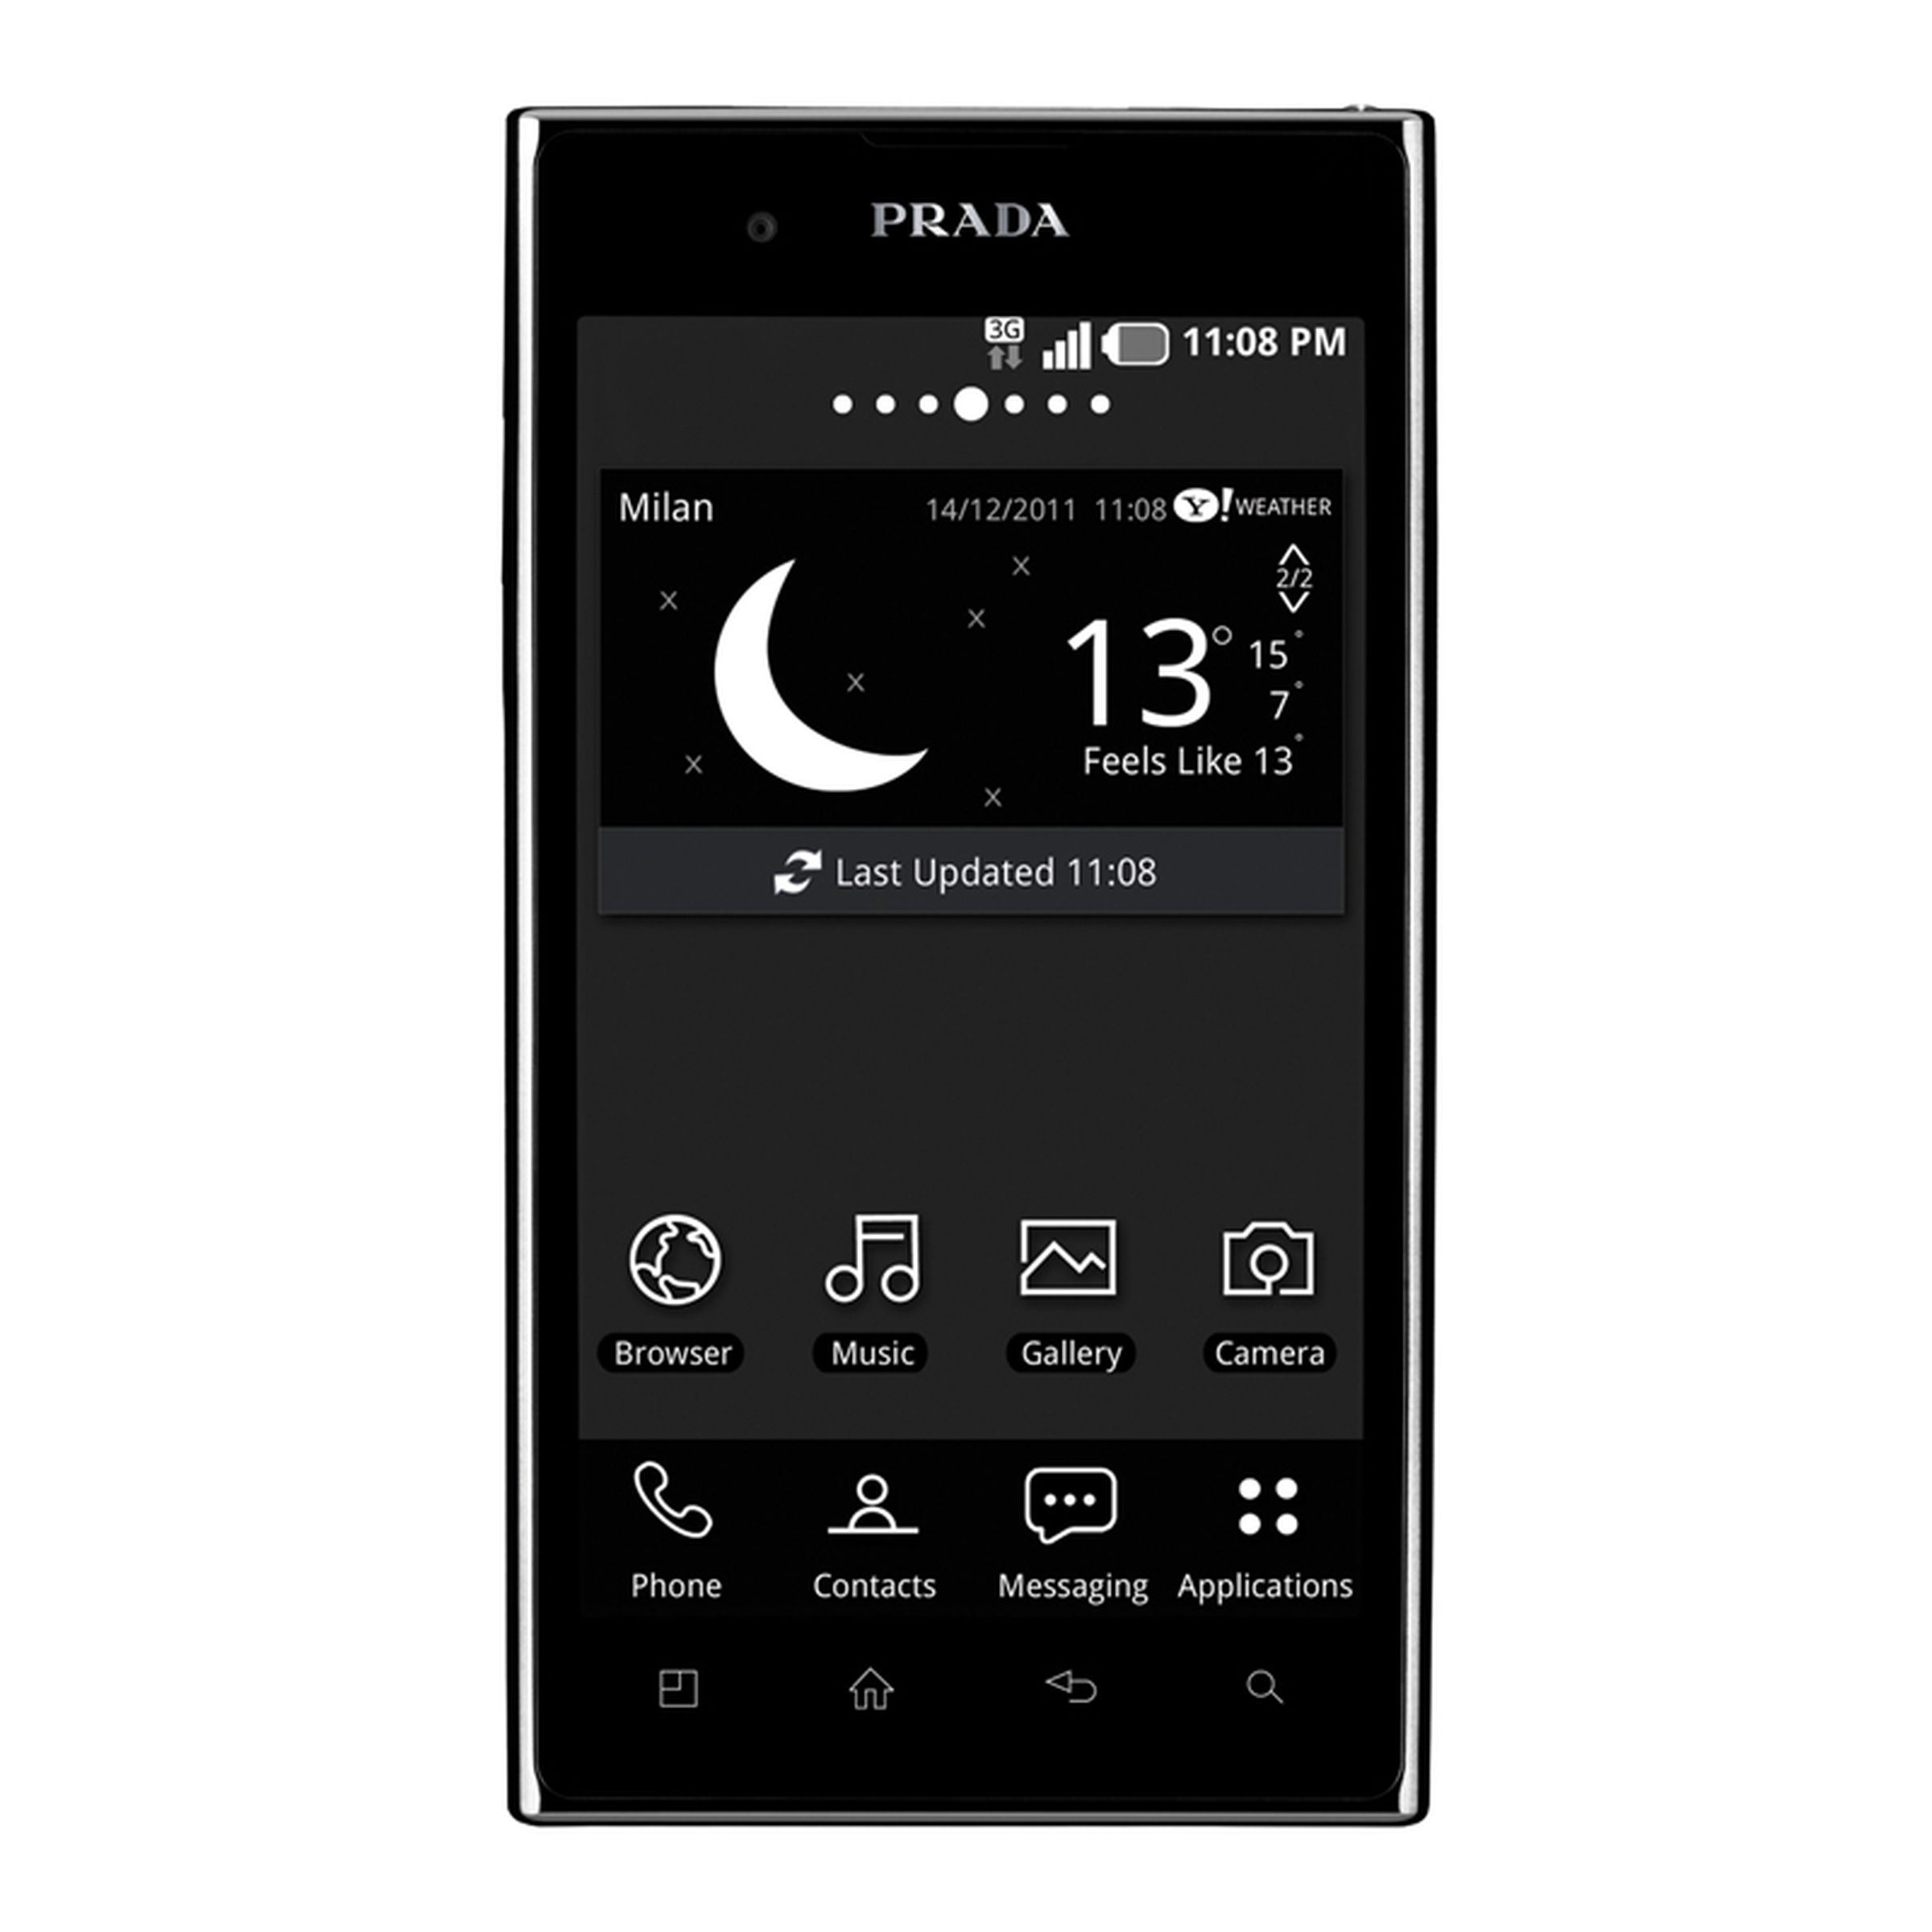 LG Prada Phone 3.0 official pictures